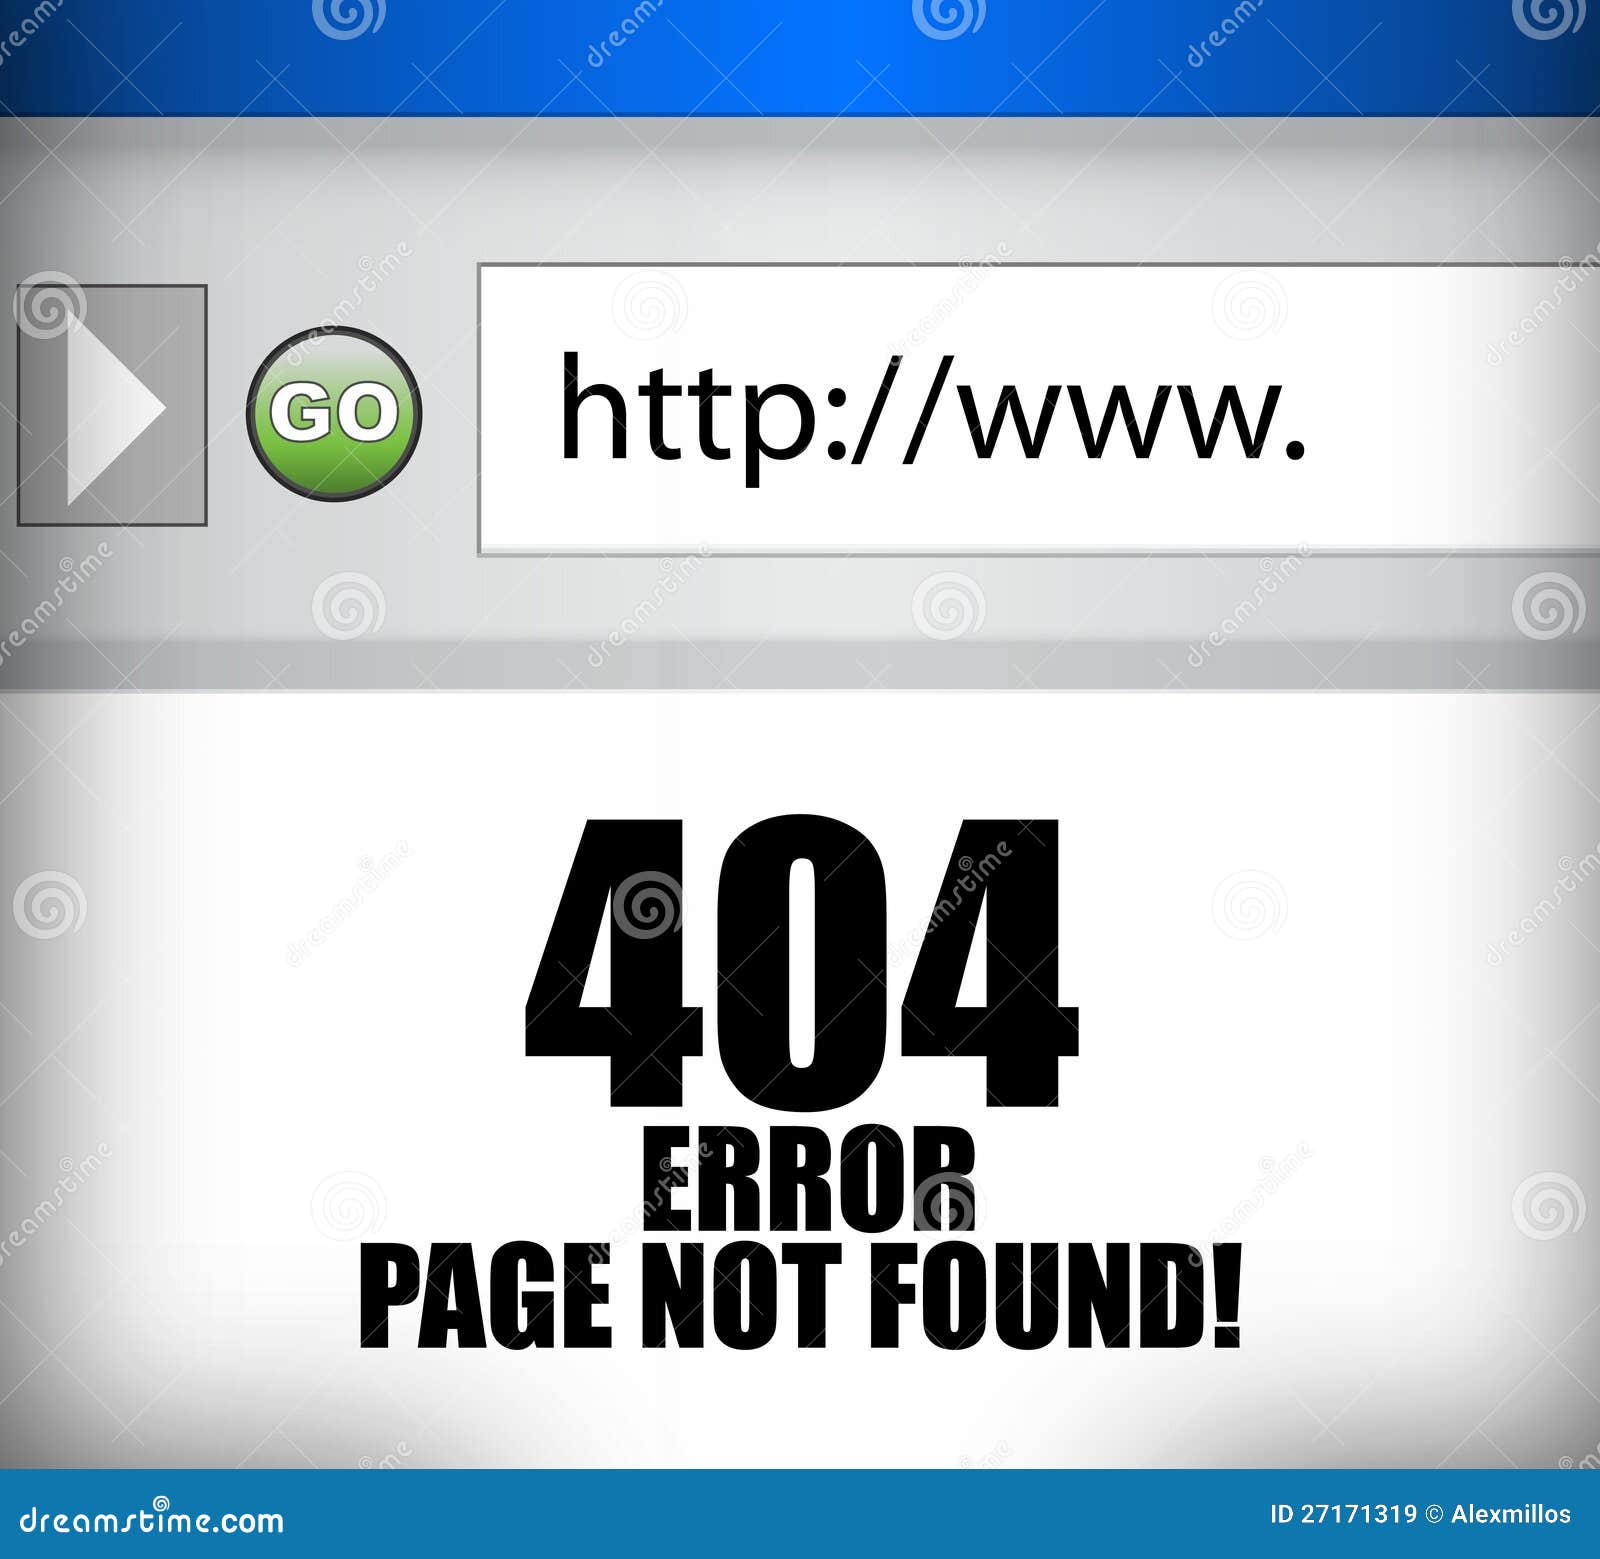 404-error-page-not-found-browser-illustration-royalty-free-stock-images